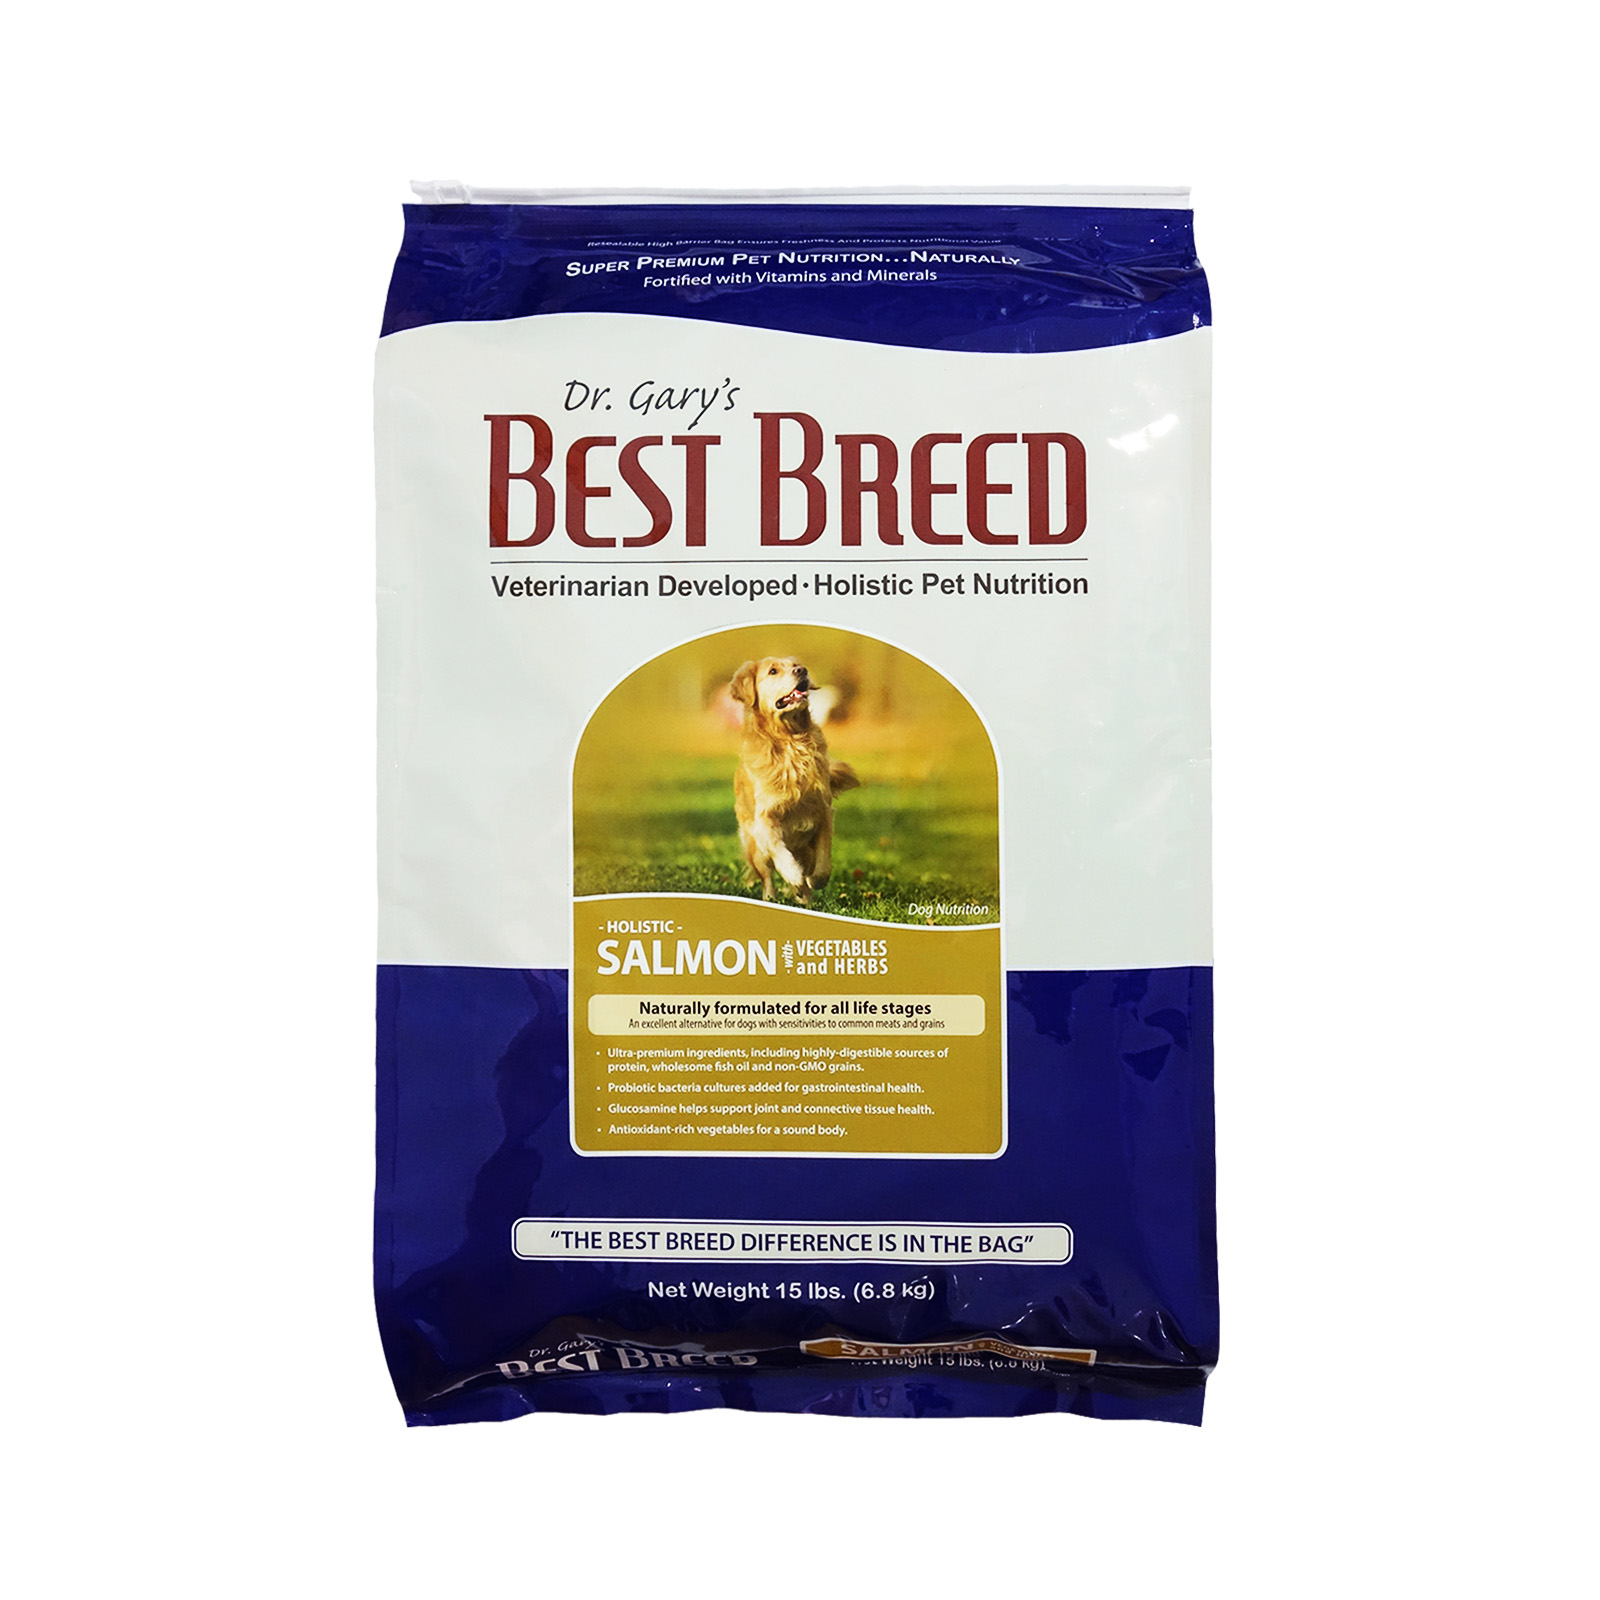 Dr. Gary's Best Breed Holistic All Life Stages Salmon with Vegetables & Herbs Dog Dry Food 15lbs (6.8Kg)